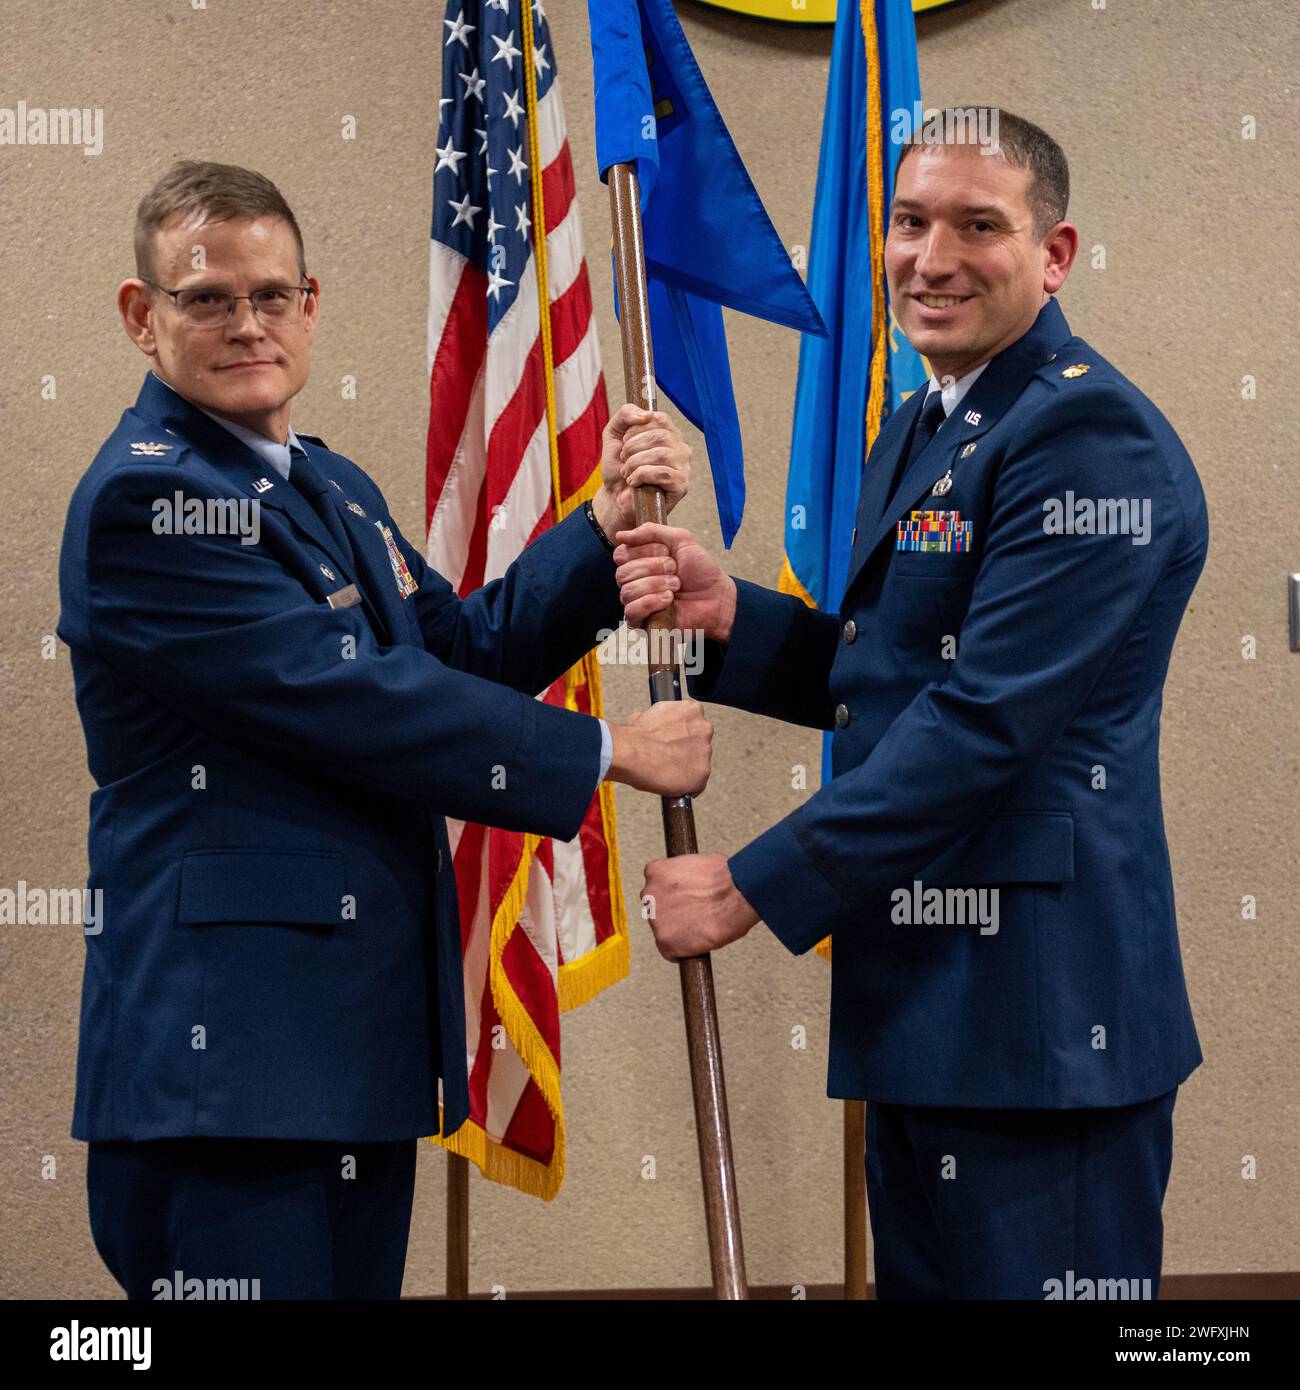 U.S. Air Force Lt. Col. Lonny Reese (left), commander of the 114th Mission Support Group, passes the 114th Civil Engineer Squadron (CES) guidon to Maj. Benjamin D. Shafer, incoming 114th CES commander during a change of command ceremony at Joe Foss Field, South Dakota, Jan. 7, 2024. The primary aim of the ceremony is to allow the team members to witness the formality of command change from one officer to another. Stock Photo